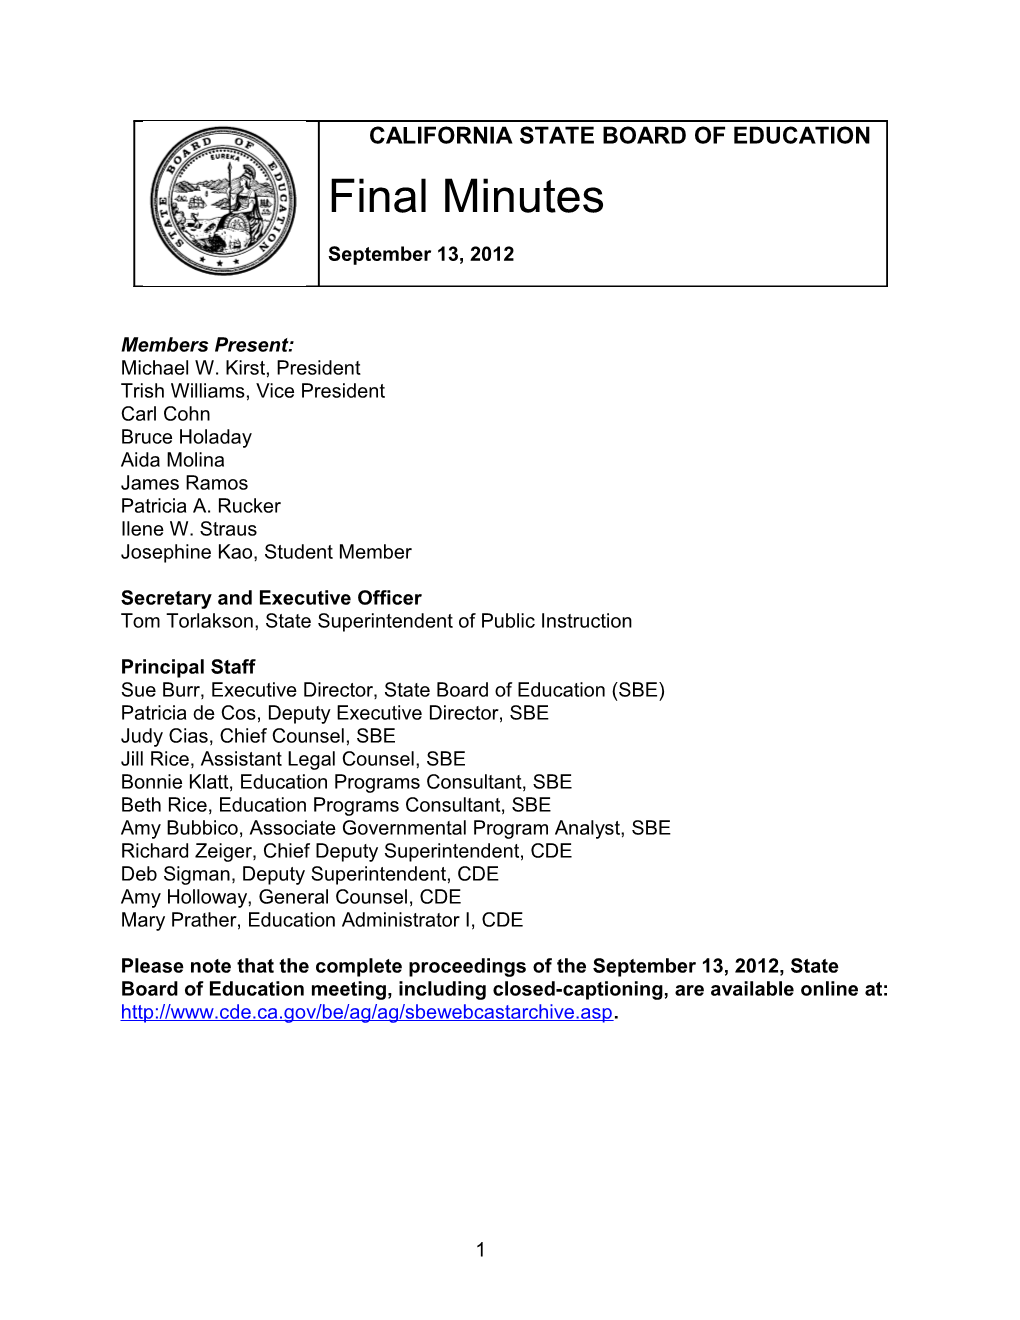 Final Minutes for September 13, 2012 - SBE Minutes (CA State Board of Education)